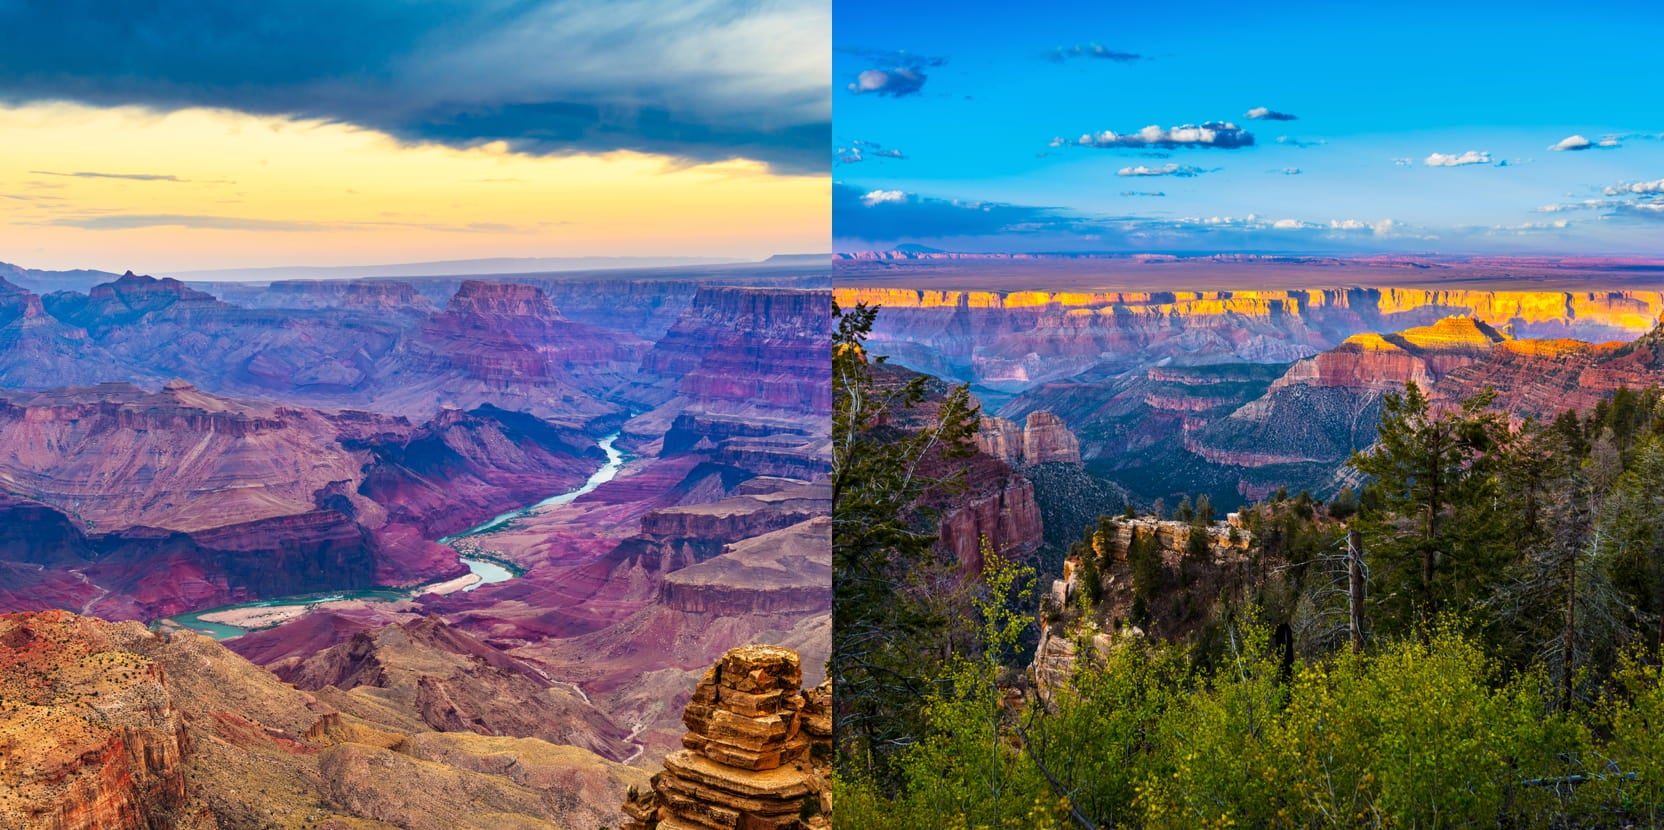 a split image of a view of the grand canyon north rim vs south rim side by side